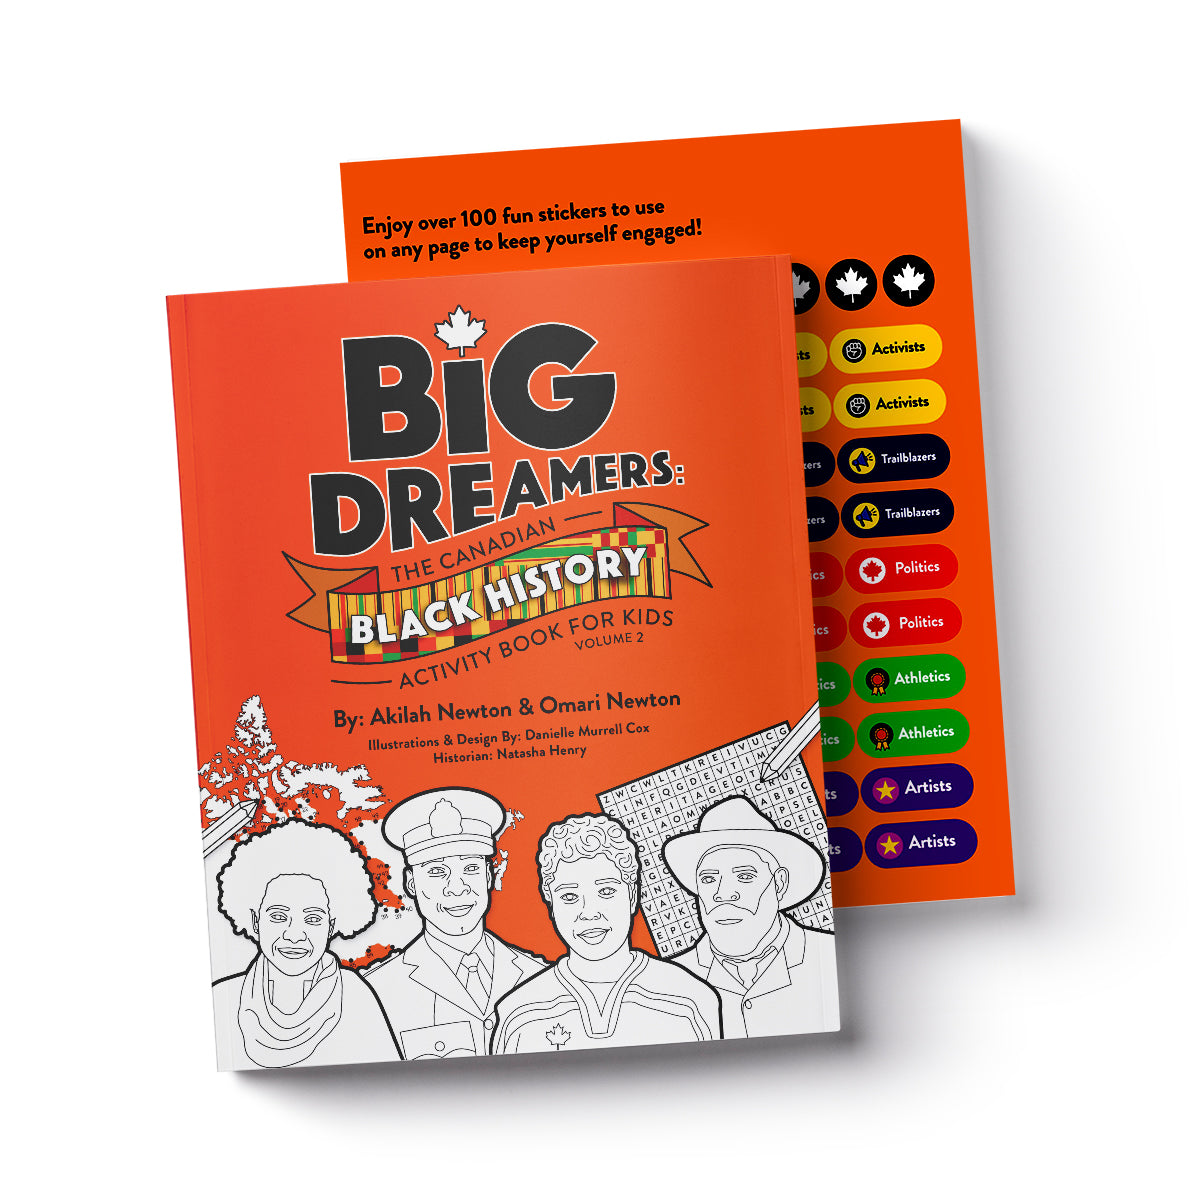 Big Dreamers: Canadian Black History Activity Book for Kids Vol. 2